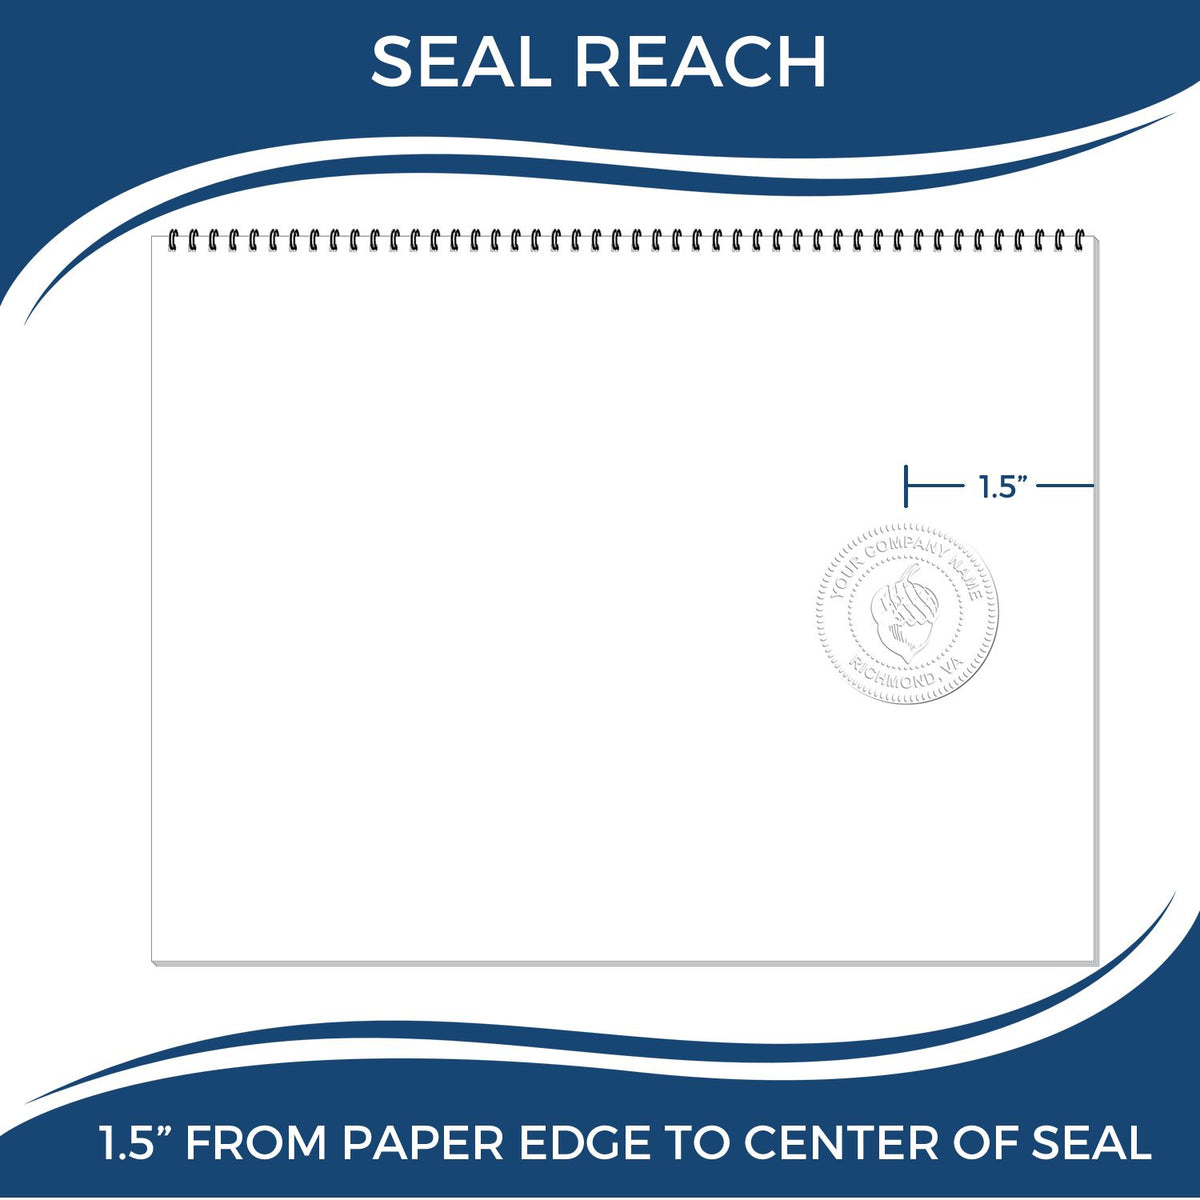 An infographic showing the seal reach which is represented by a ruler and a miniature seal image of the Soft Montana Professional Engineer Seal